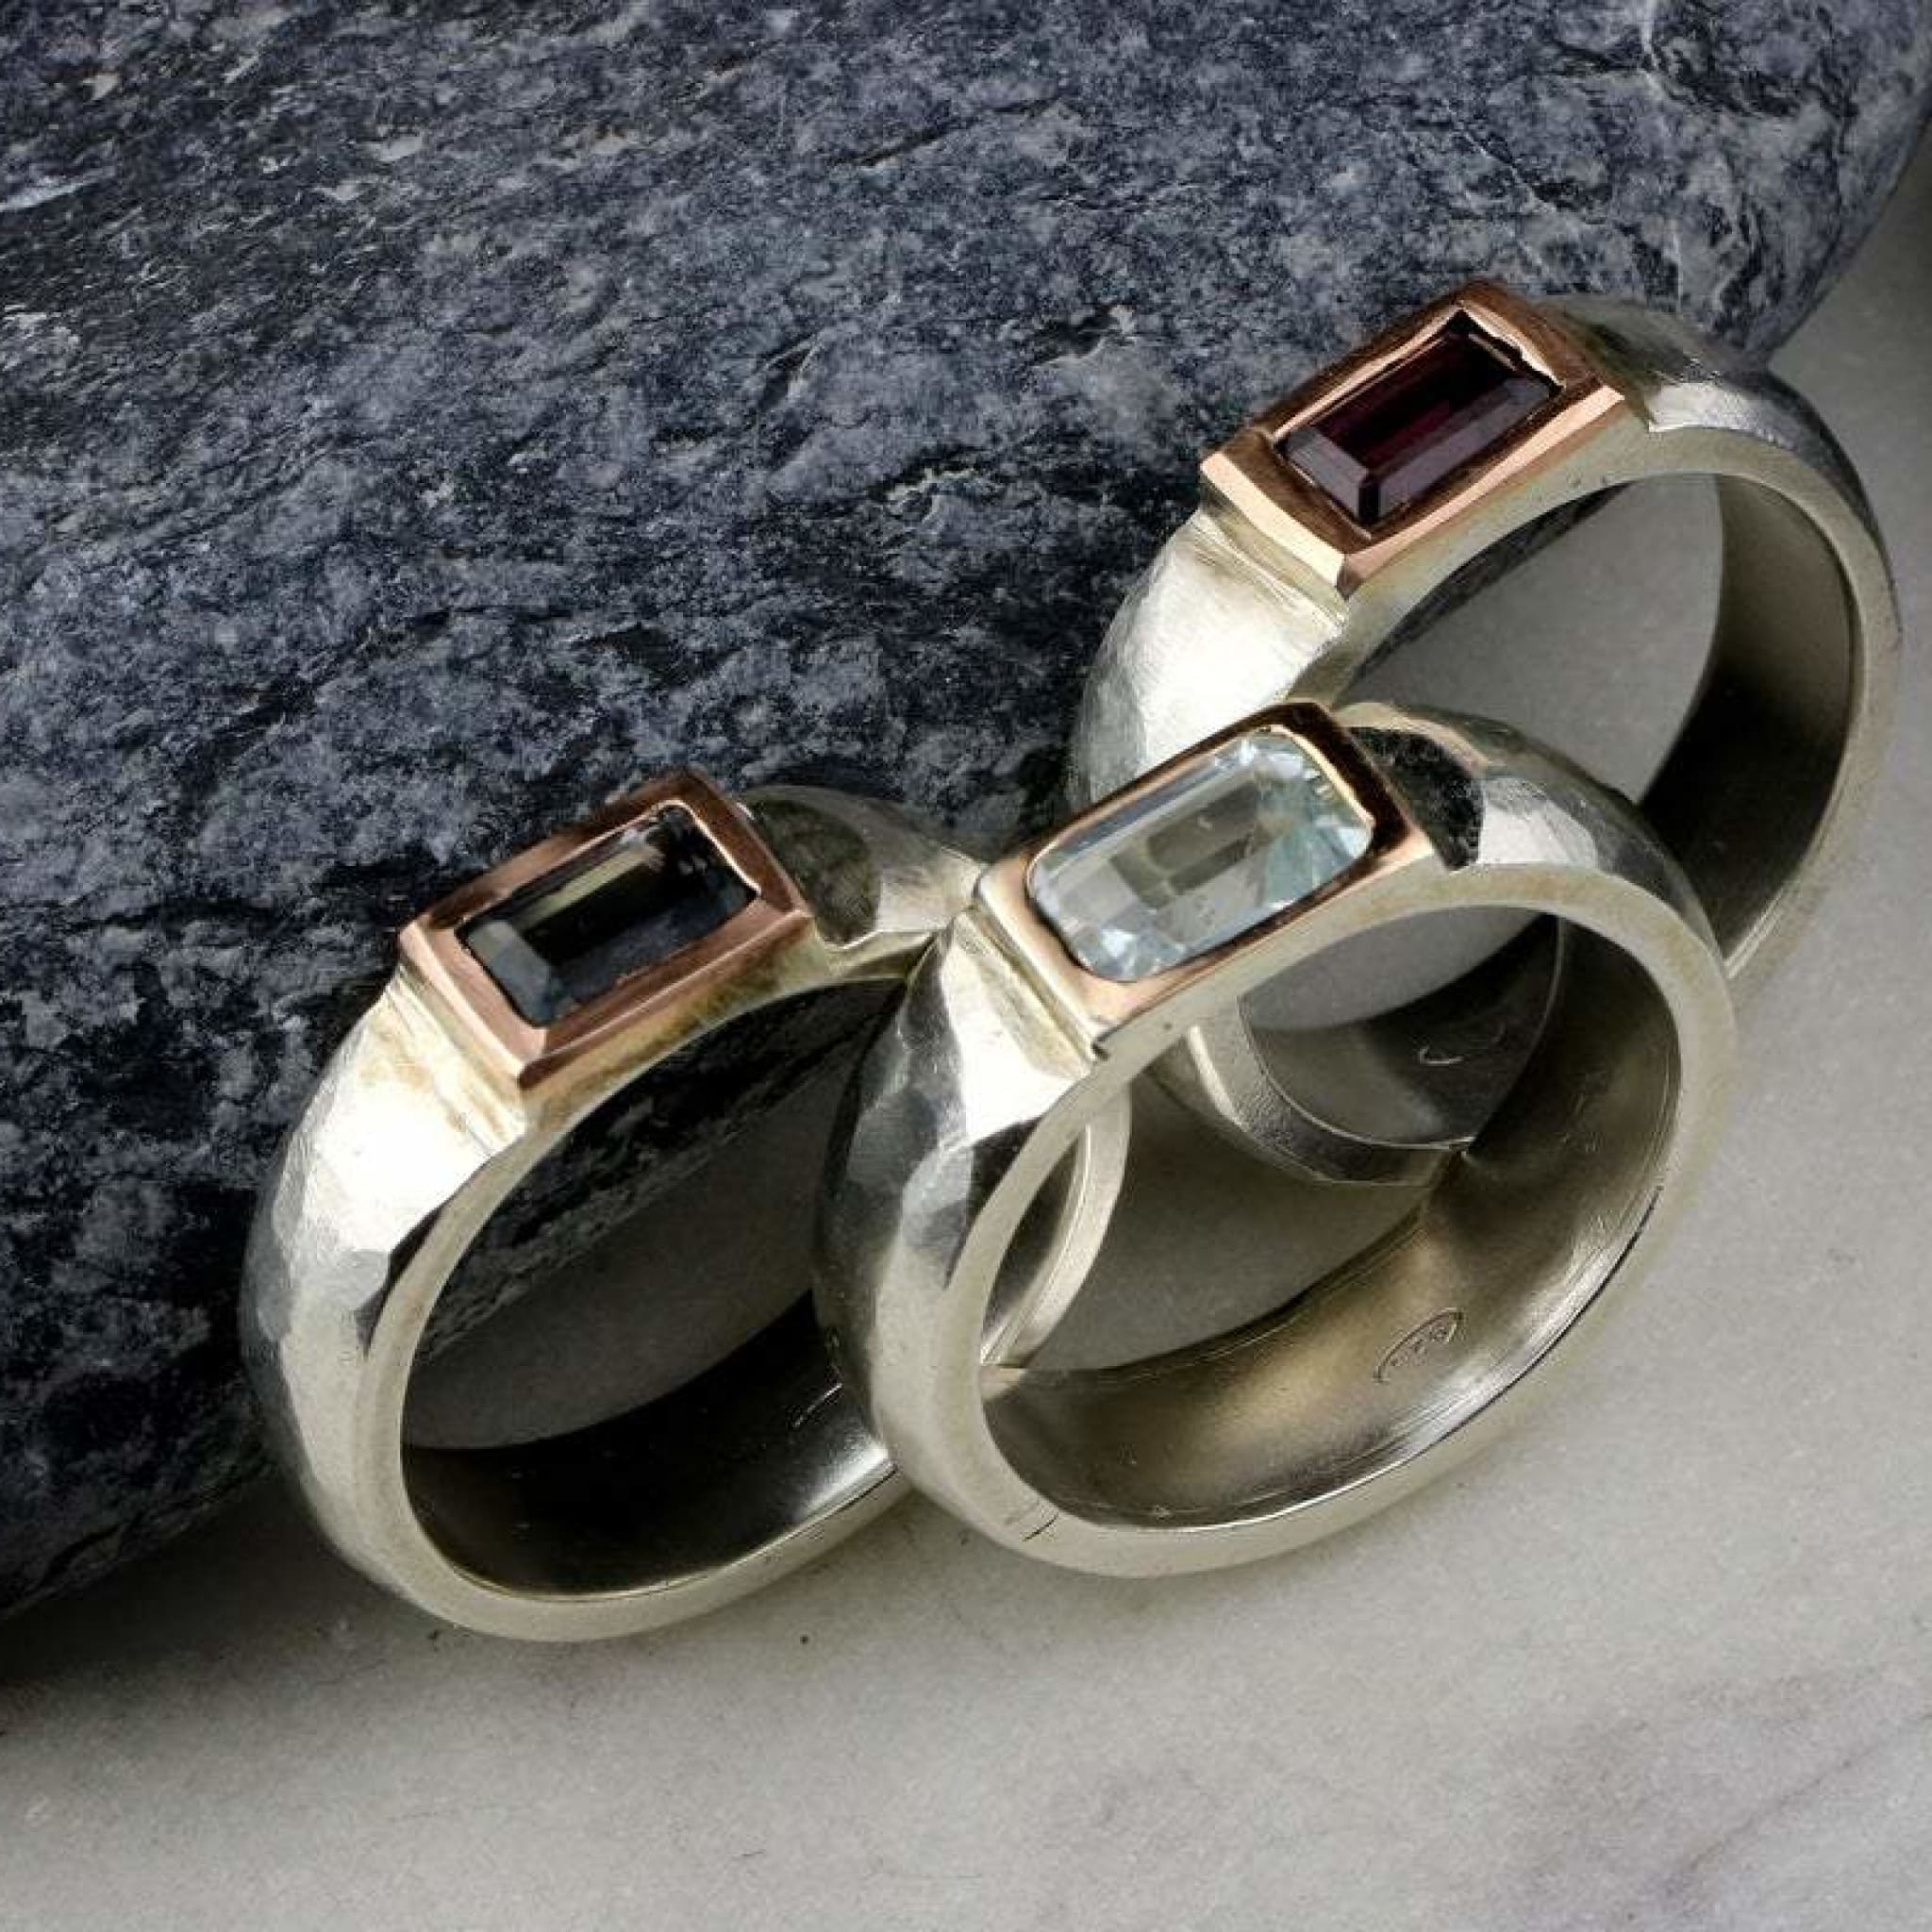 Timeless Gold Band Ring With Tourmaline Gemstone Rings